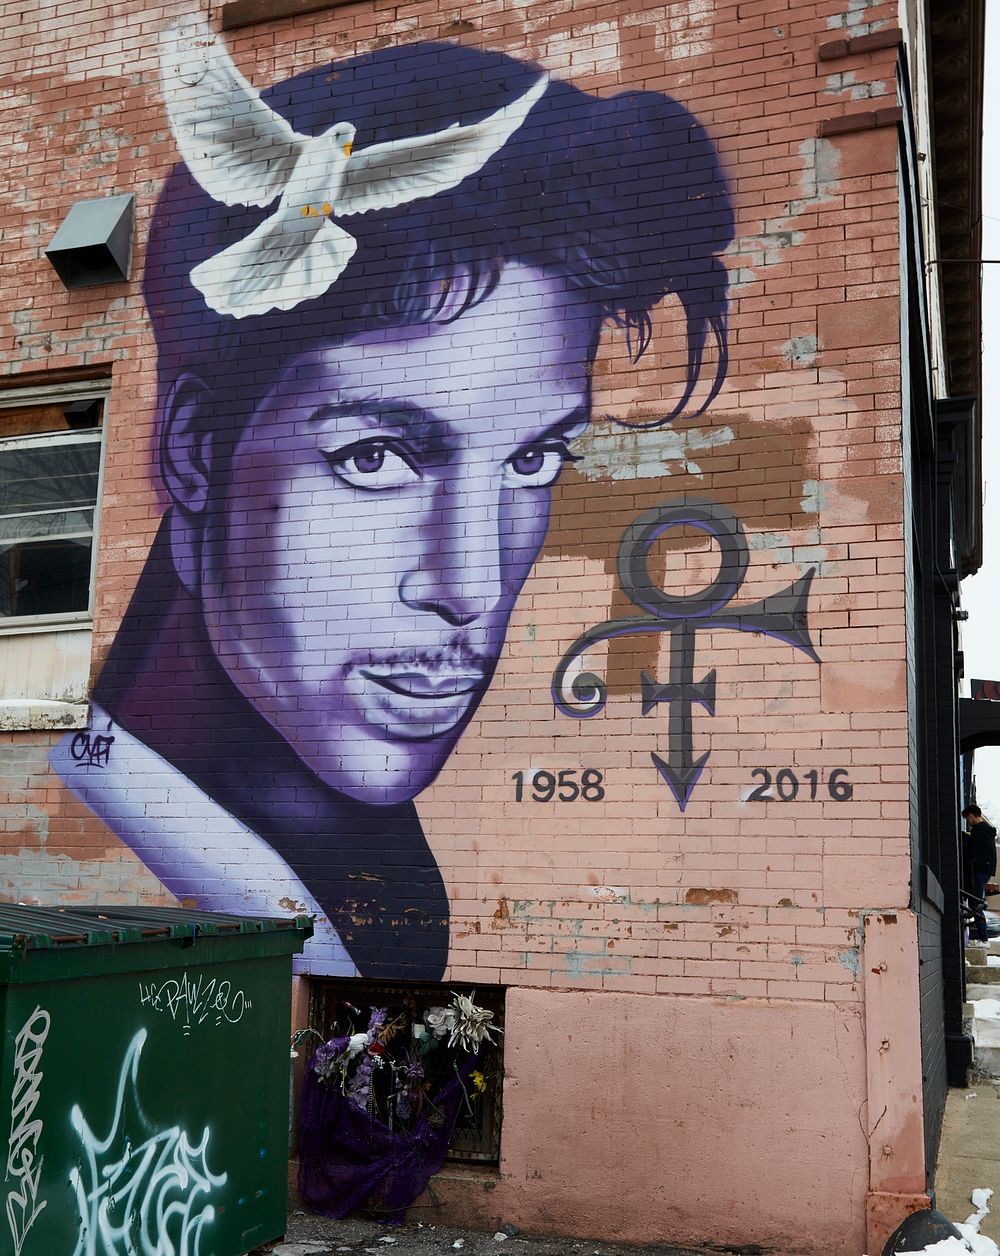                         Rock "Cyfi" Martinez's 2016 tribute mural to the mega-star singer Prince on a building in uptown…